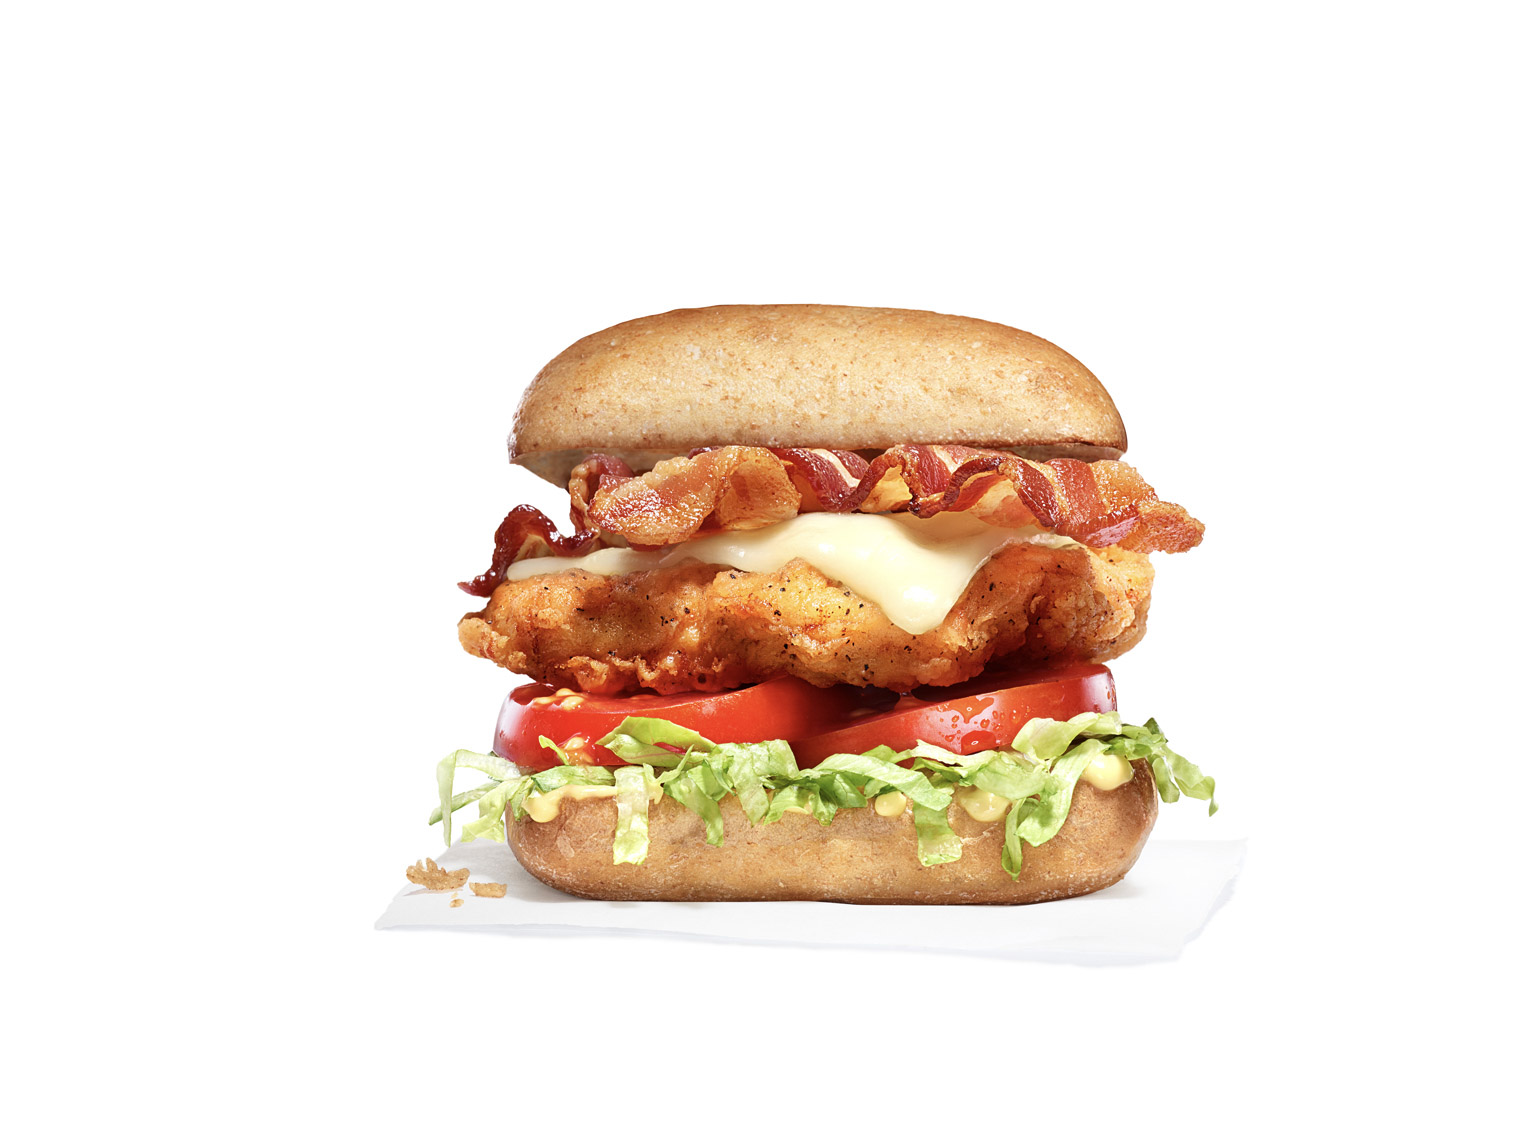 food stylist in San Francisco - Sonic Asiago Chicken Sandwich - photographed by Maren Caruso Photographer